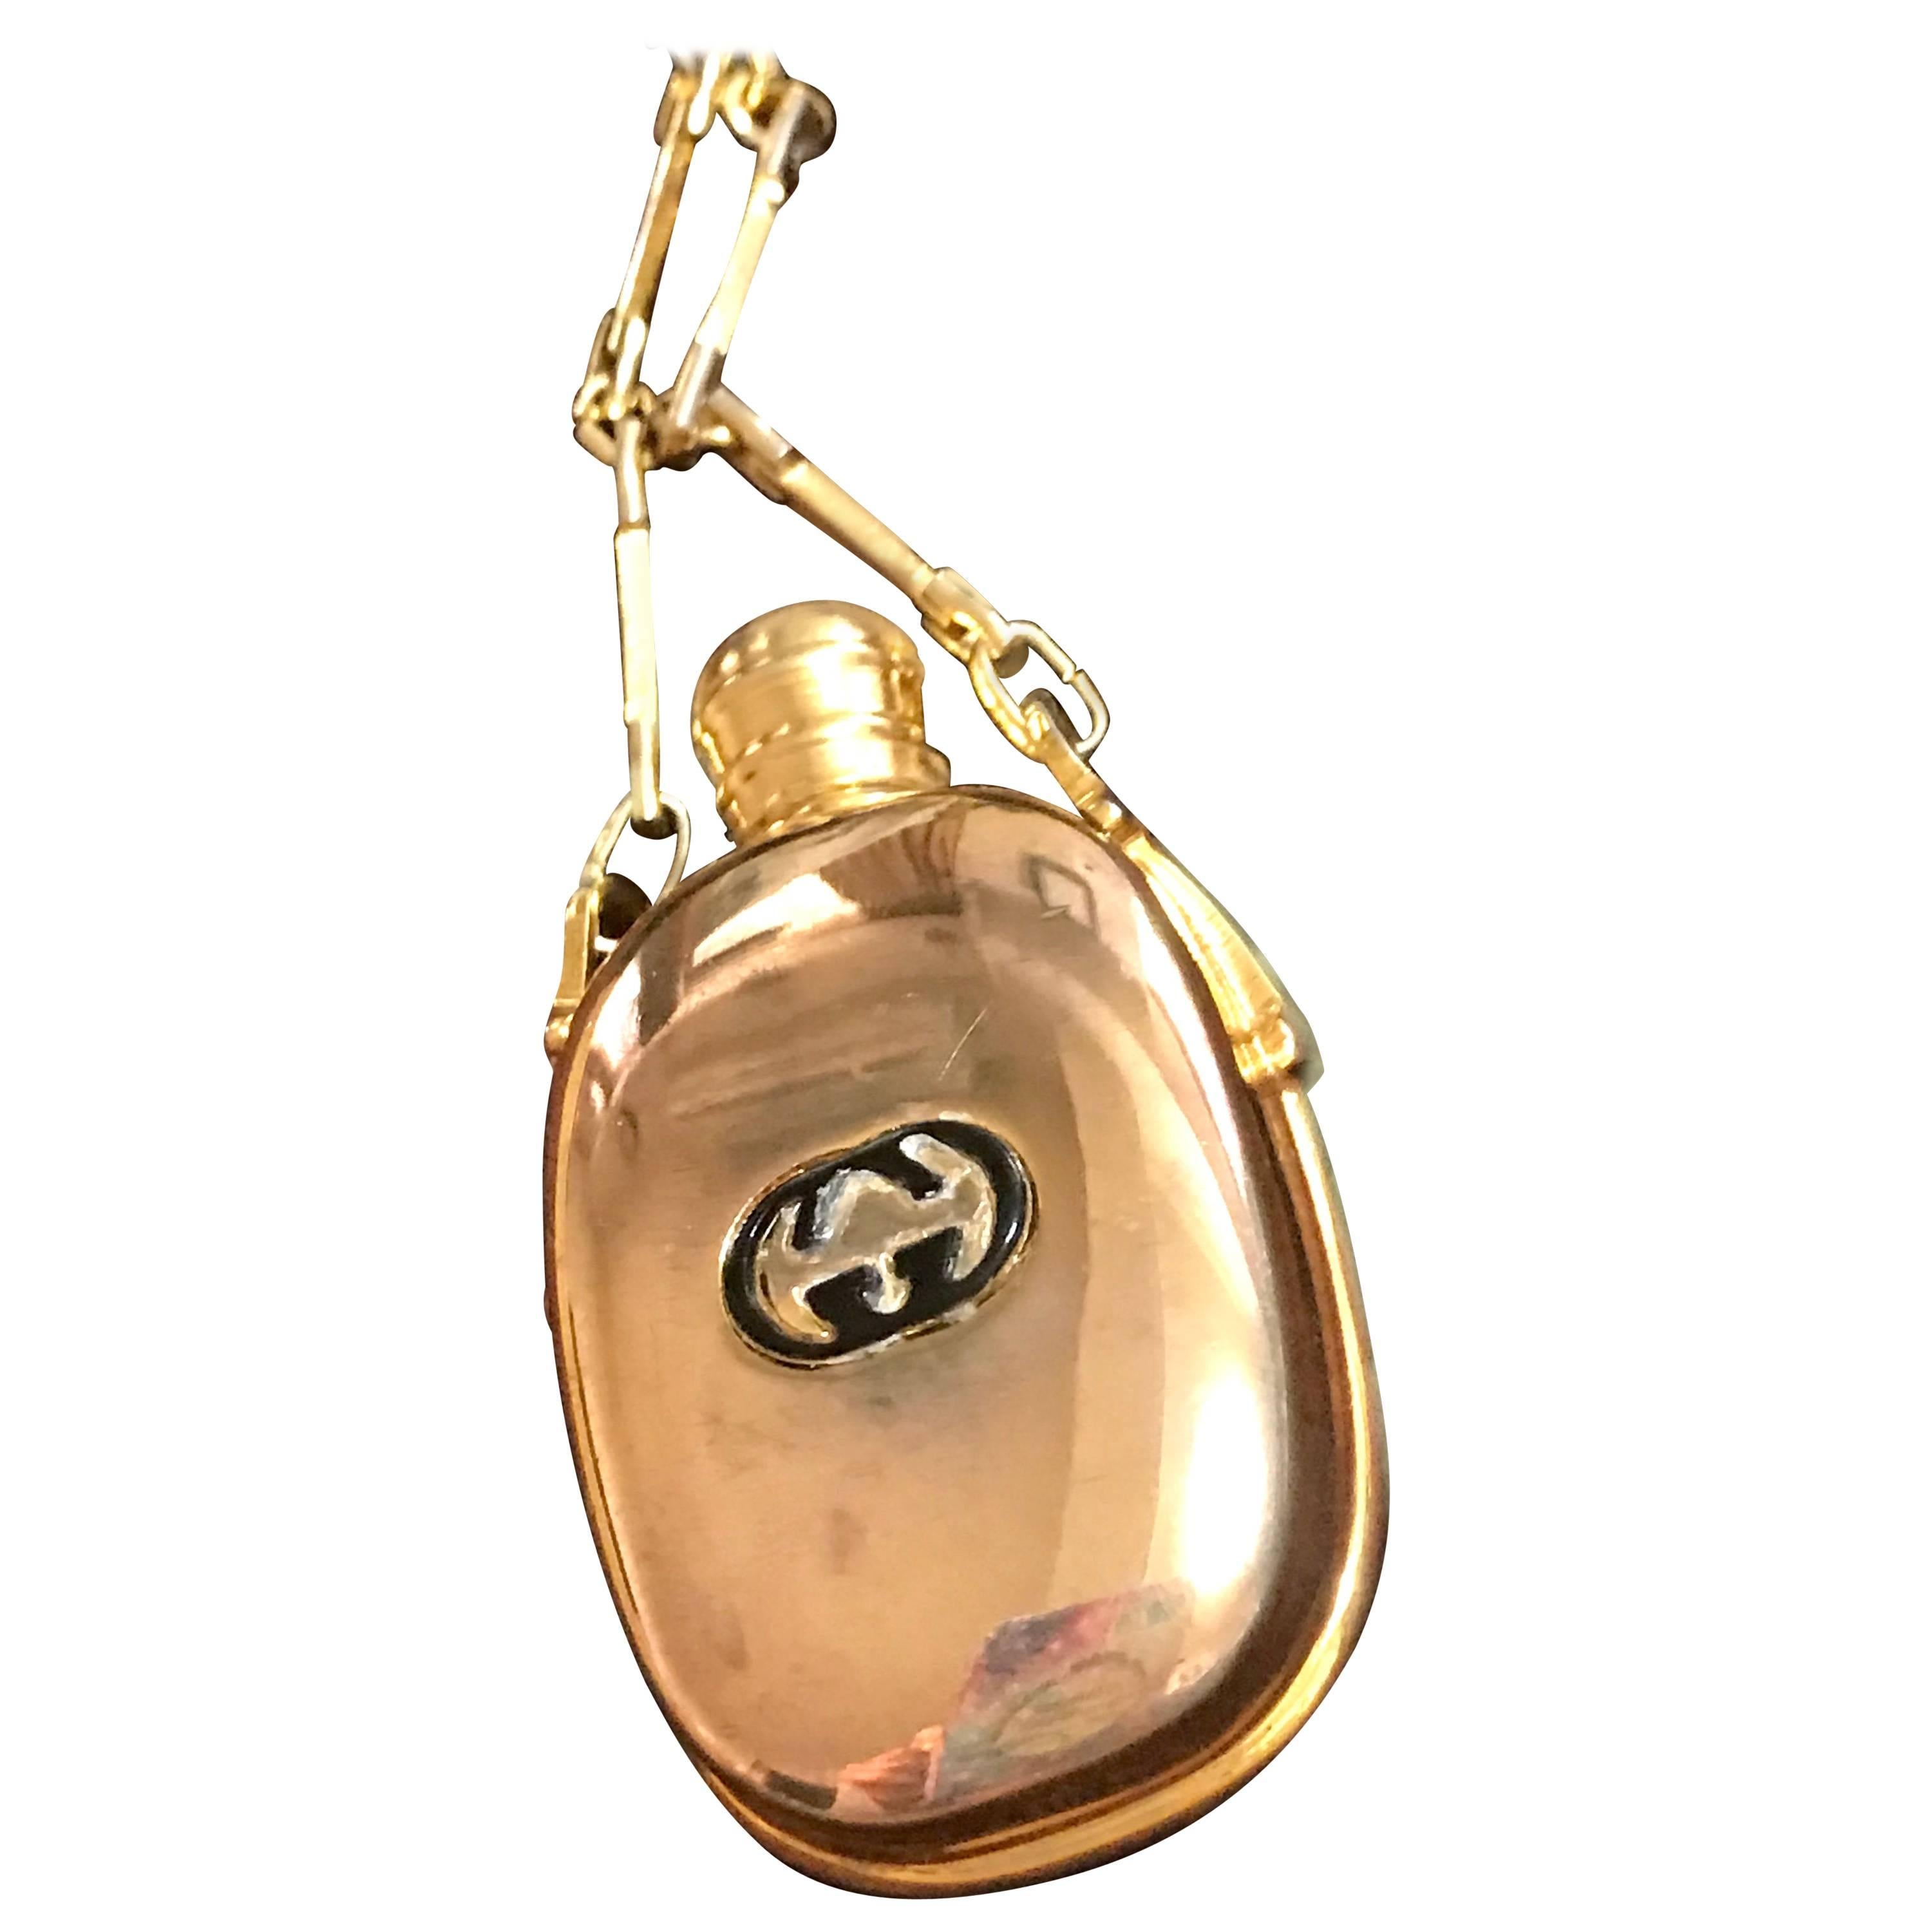 Vintage Gucci golden perfume bottle necklace with logo mark on top. 